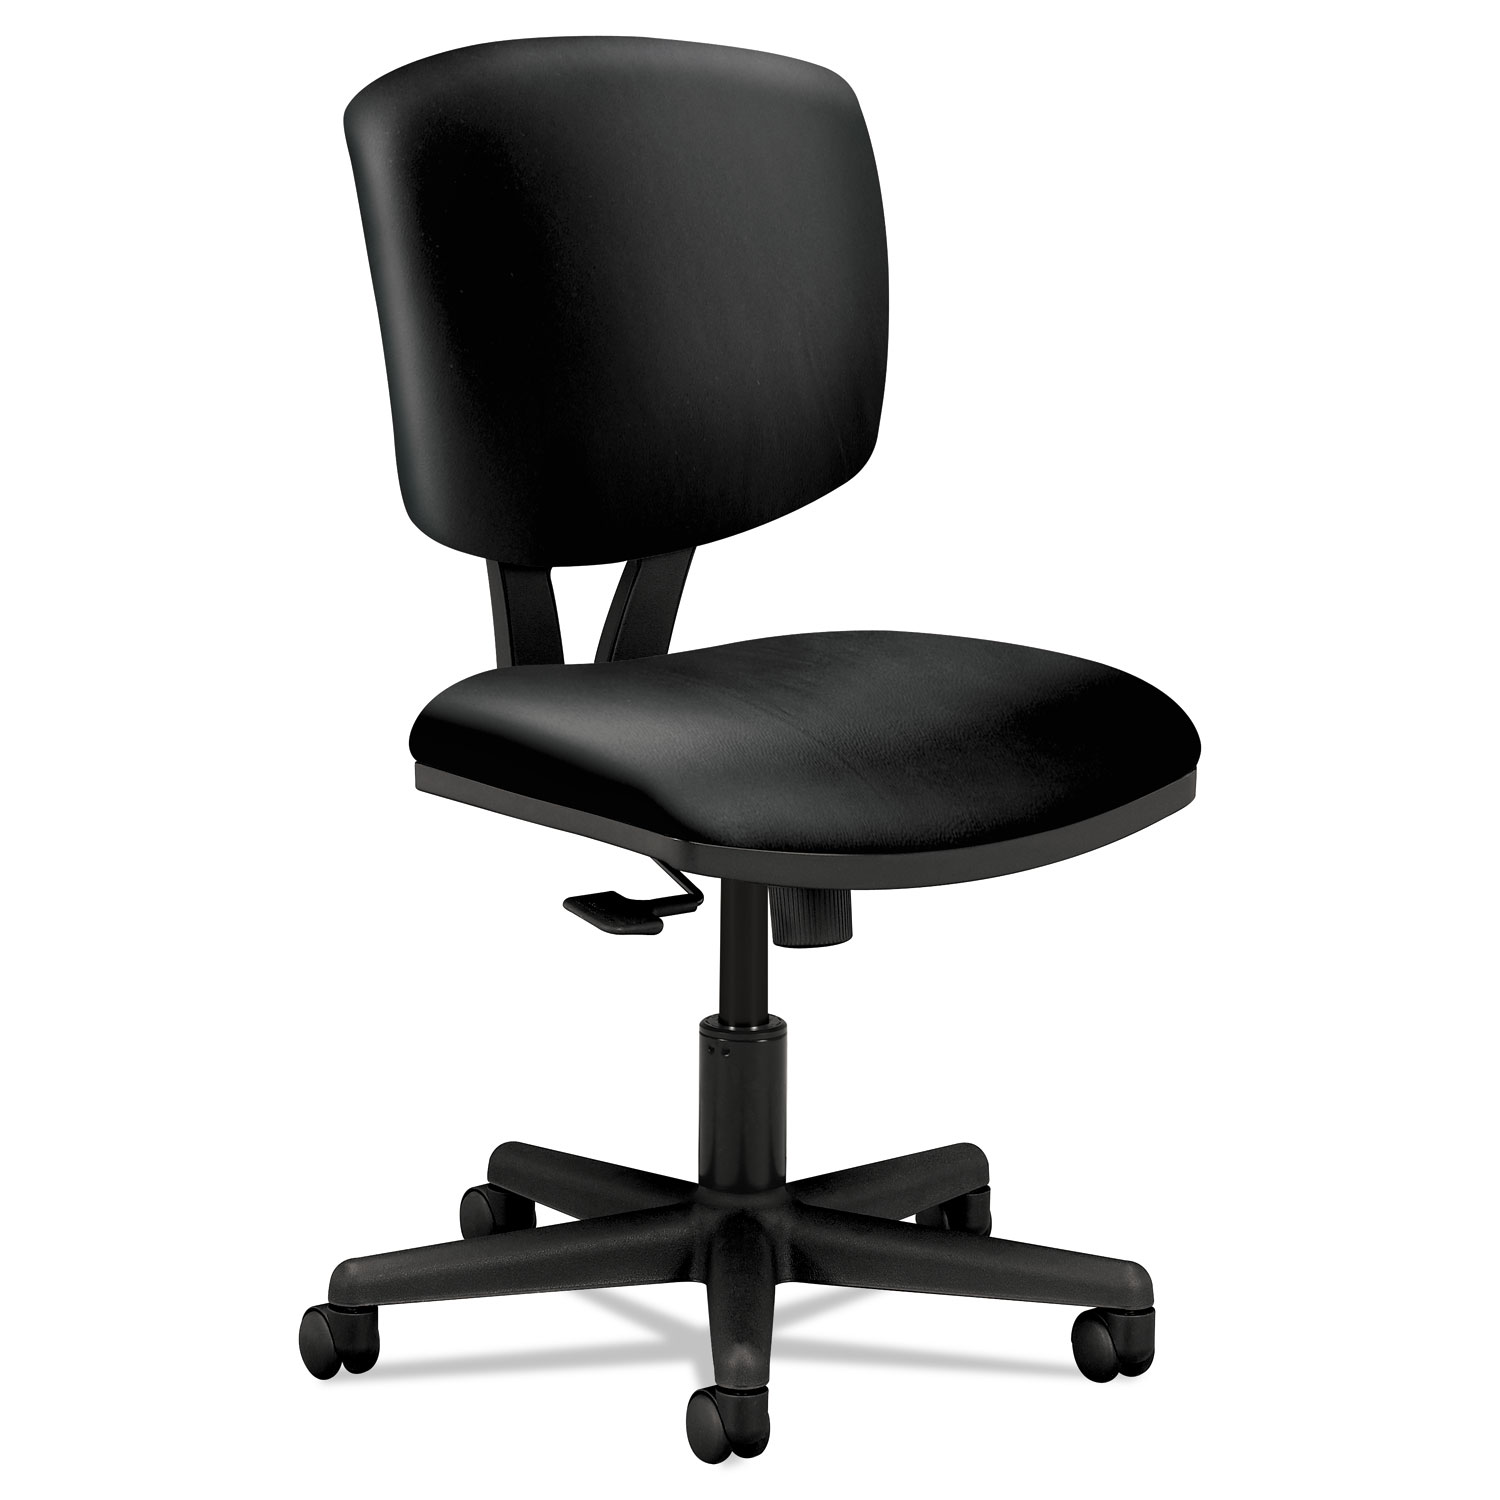  HON H5703.SB11.T Volt Series Leather Task Chair with Synchro-Tilt, Supports up to 250 lbs., Black Seat/Black Back, Black Base (HON5703SB11T) 